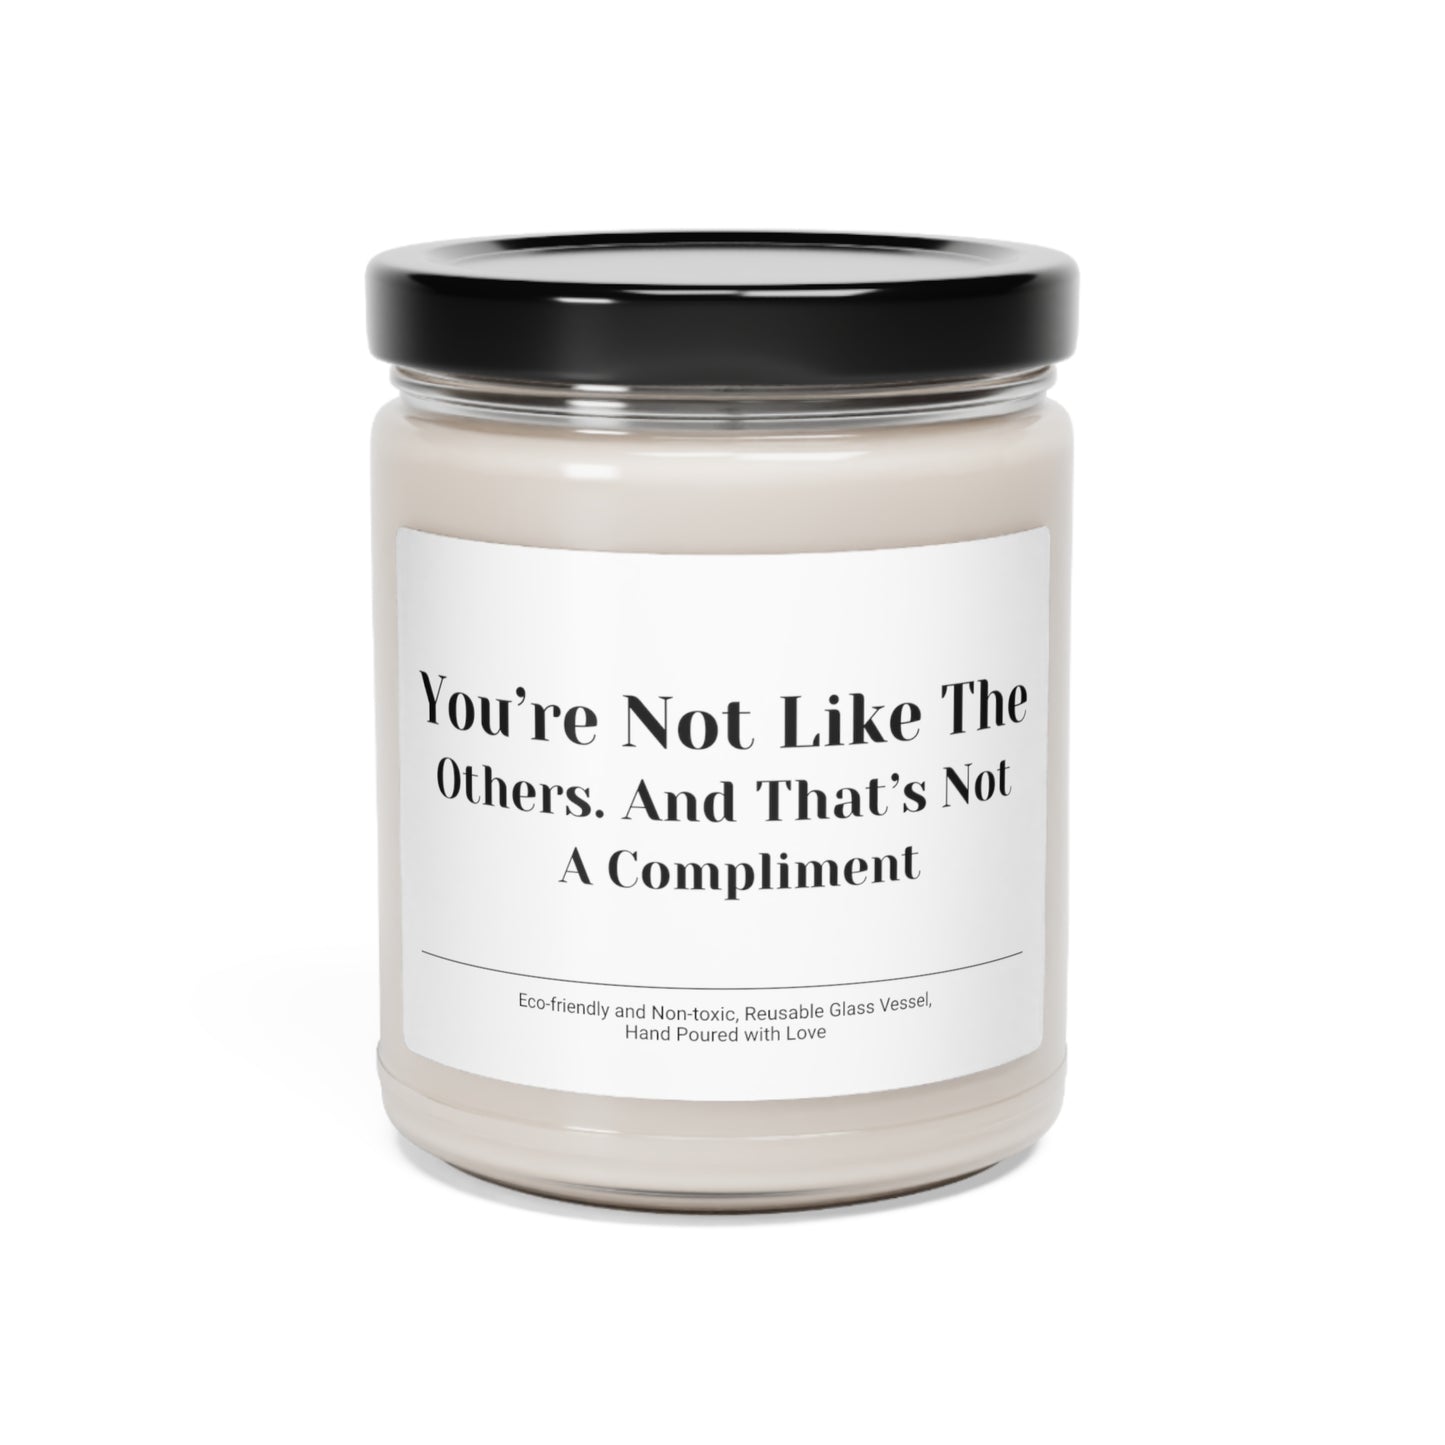 Her-17-Scented Soy Candle, 9oz